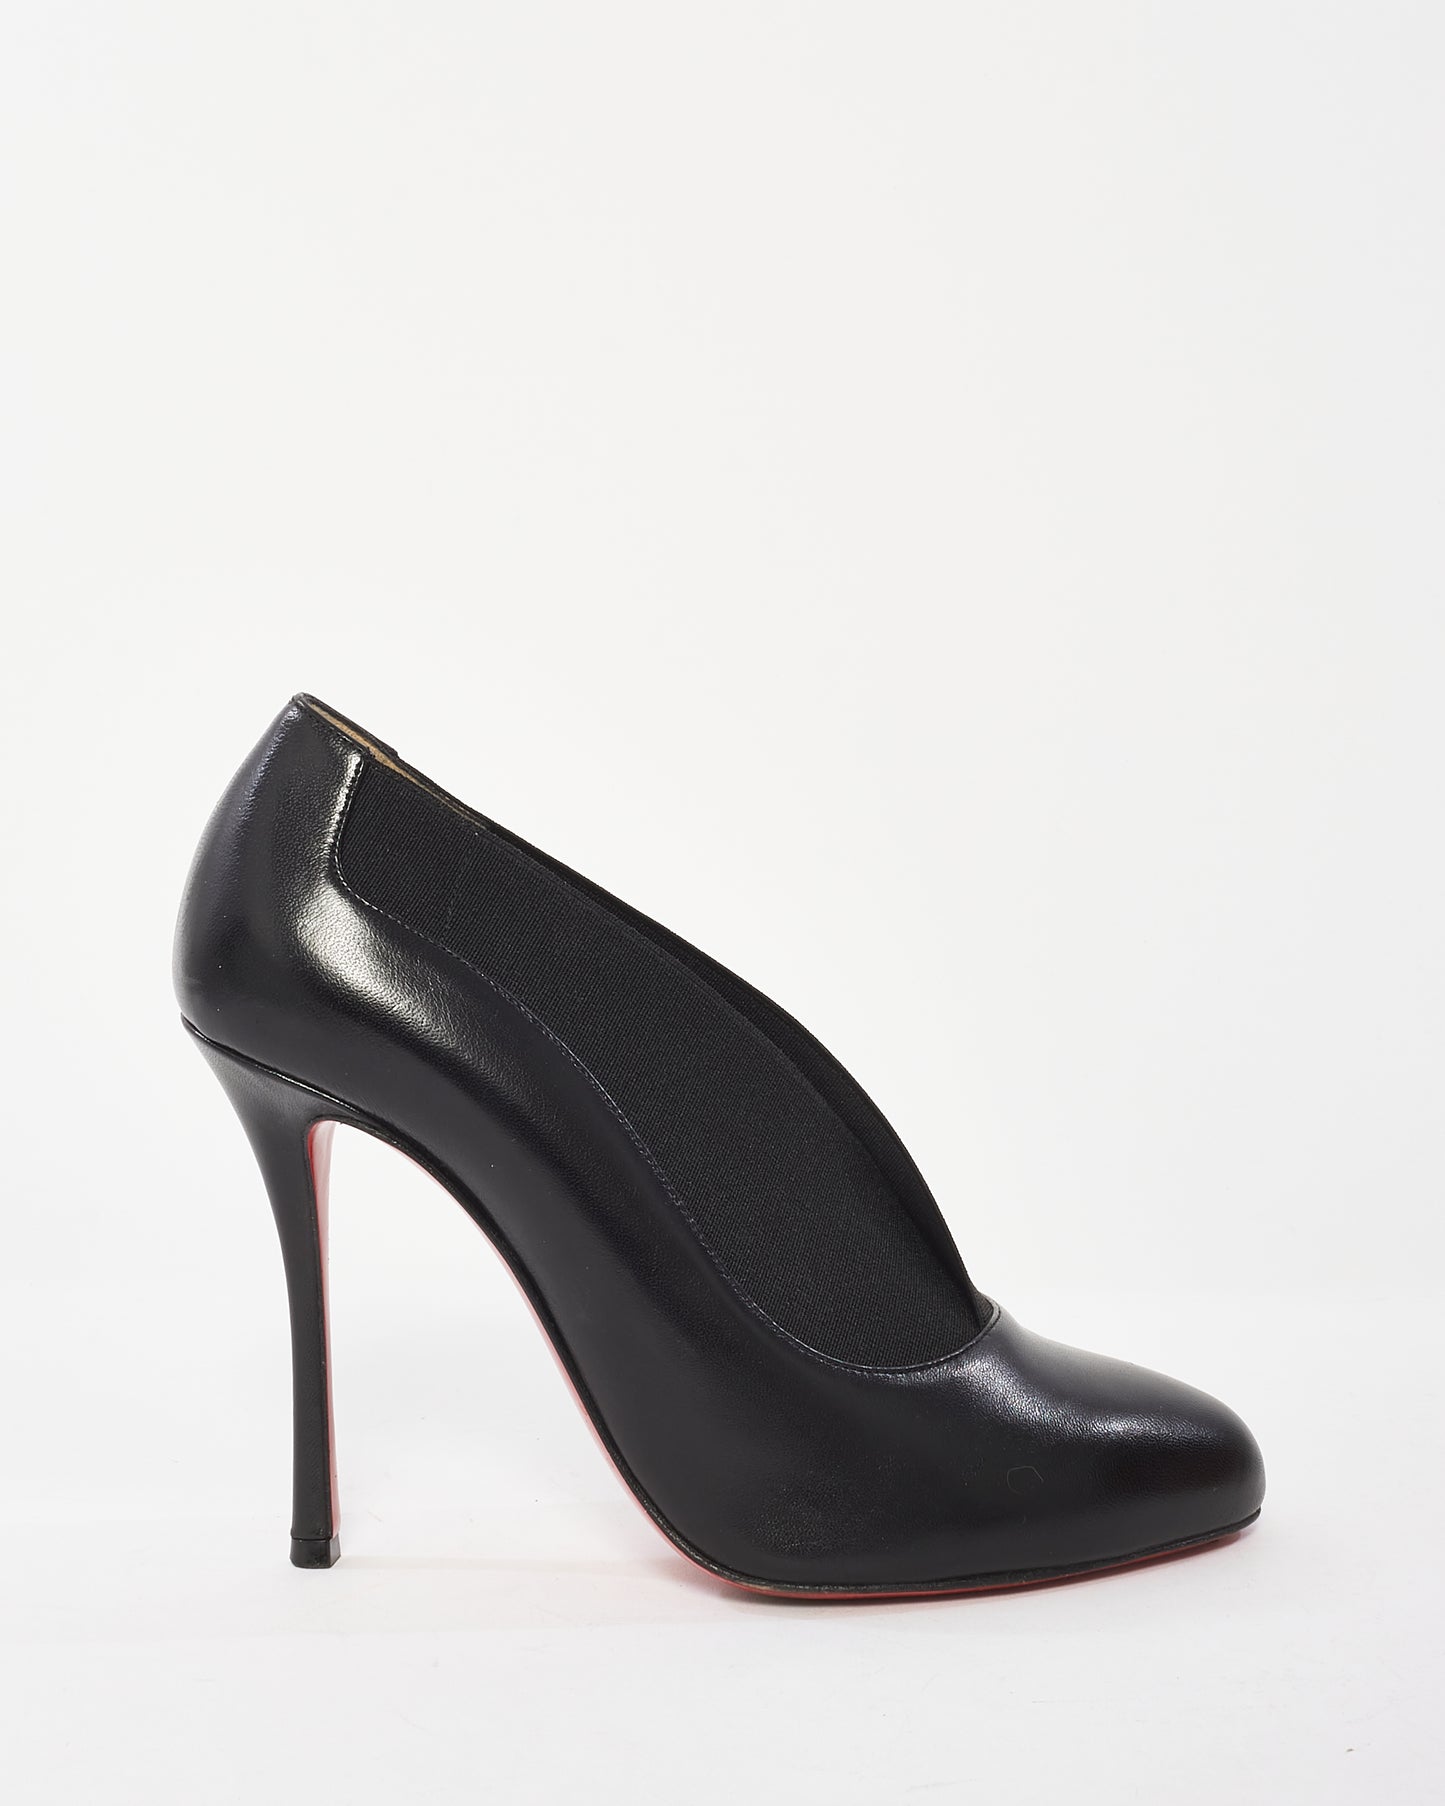 Christian Louboutin Black Leather Toot Couverte 100mm Pump - 37.5